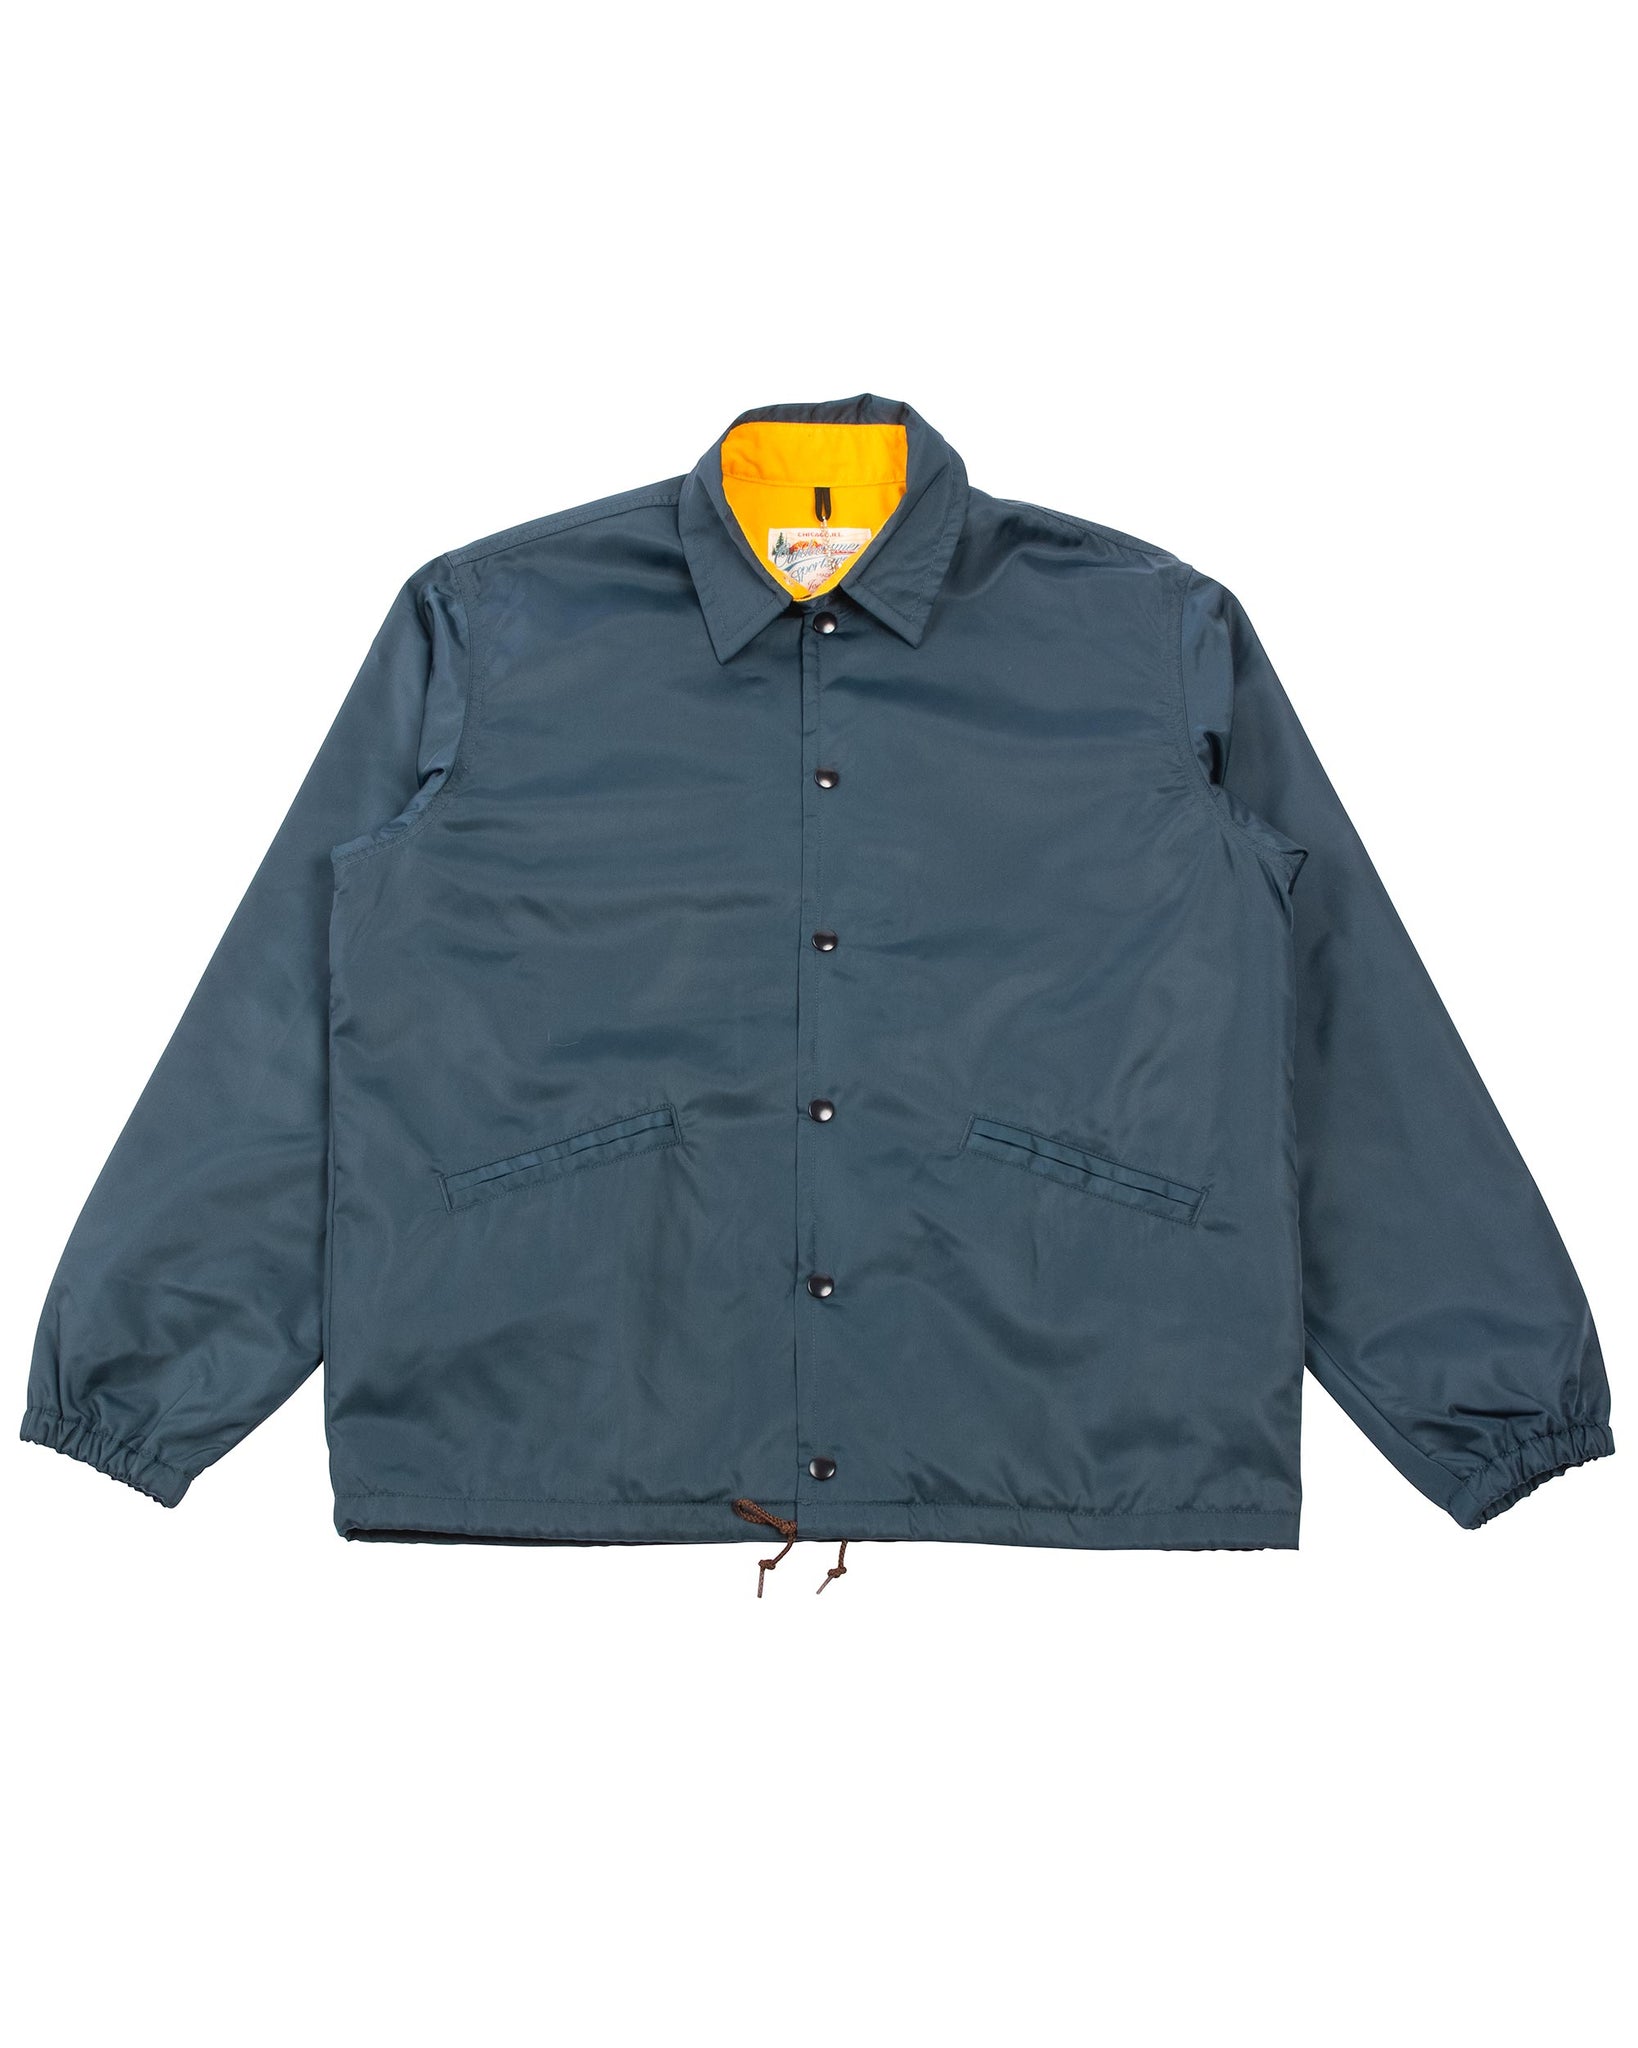 The Real McCoy's MJ22019 Nylon Cotton Lined Coach Jacket Navy